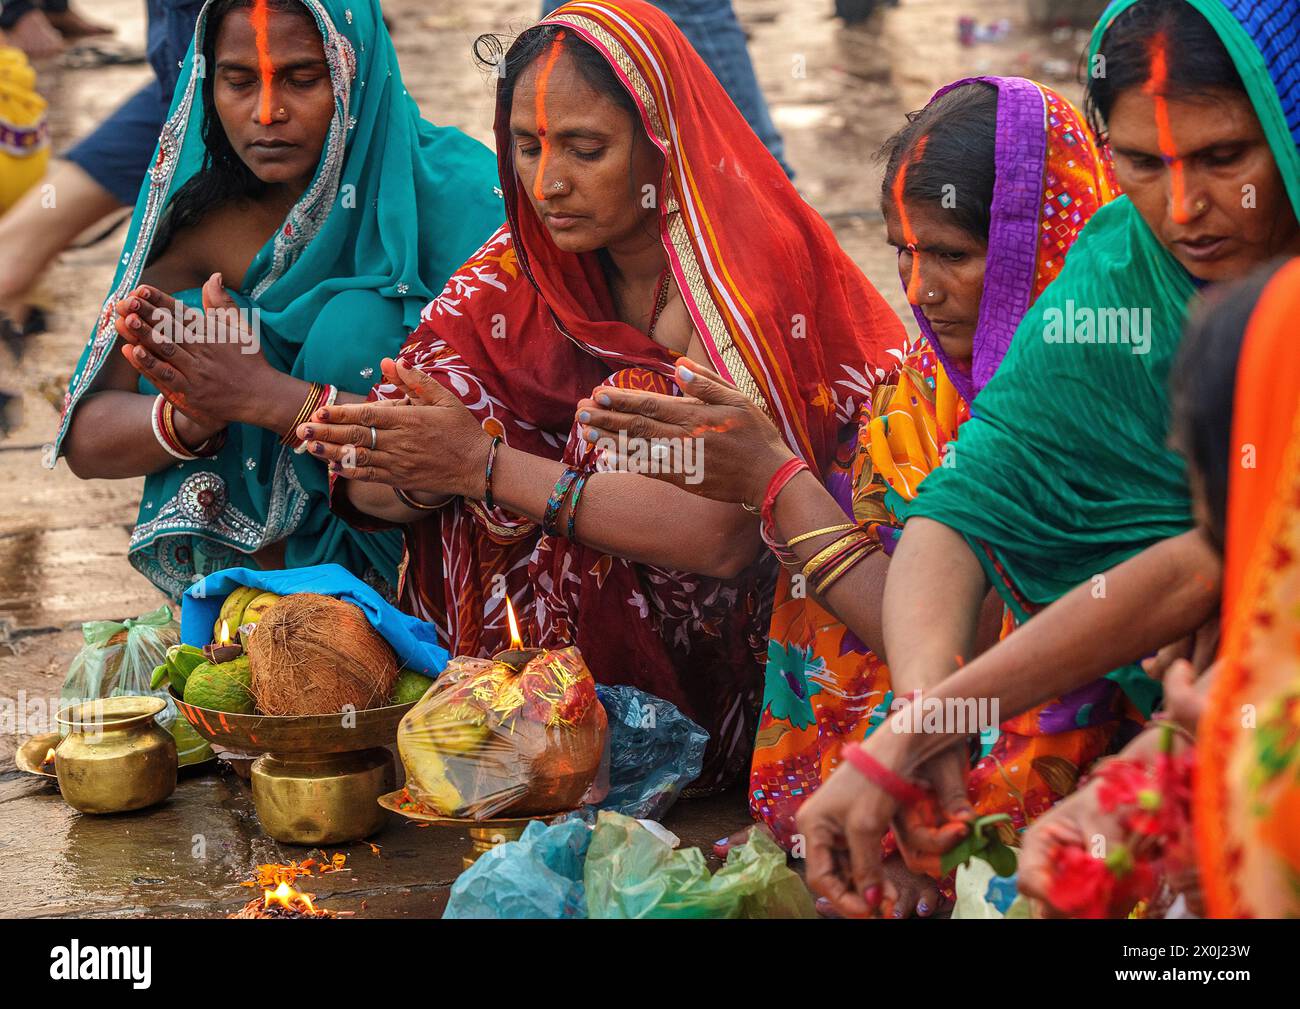 Pilgrim women with fruit offerings praying next to a flame on the banks of the Ganges River at Varanasi, India Stock Photo